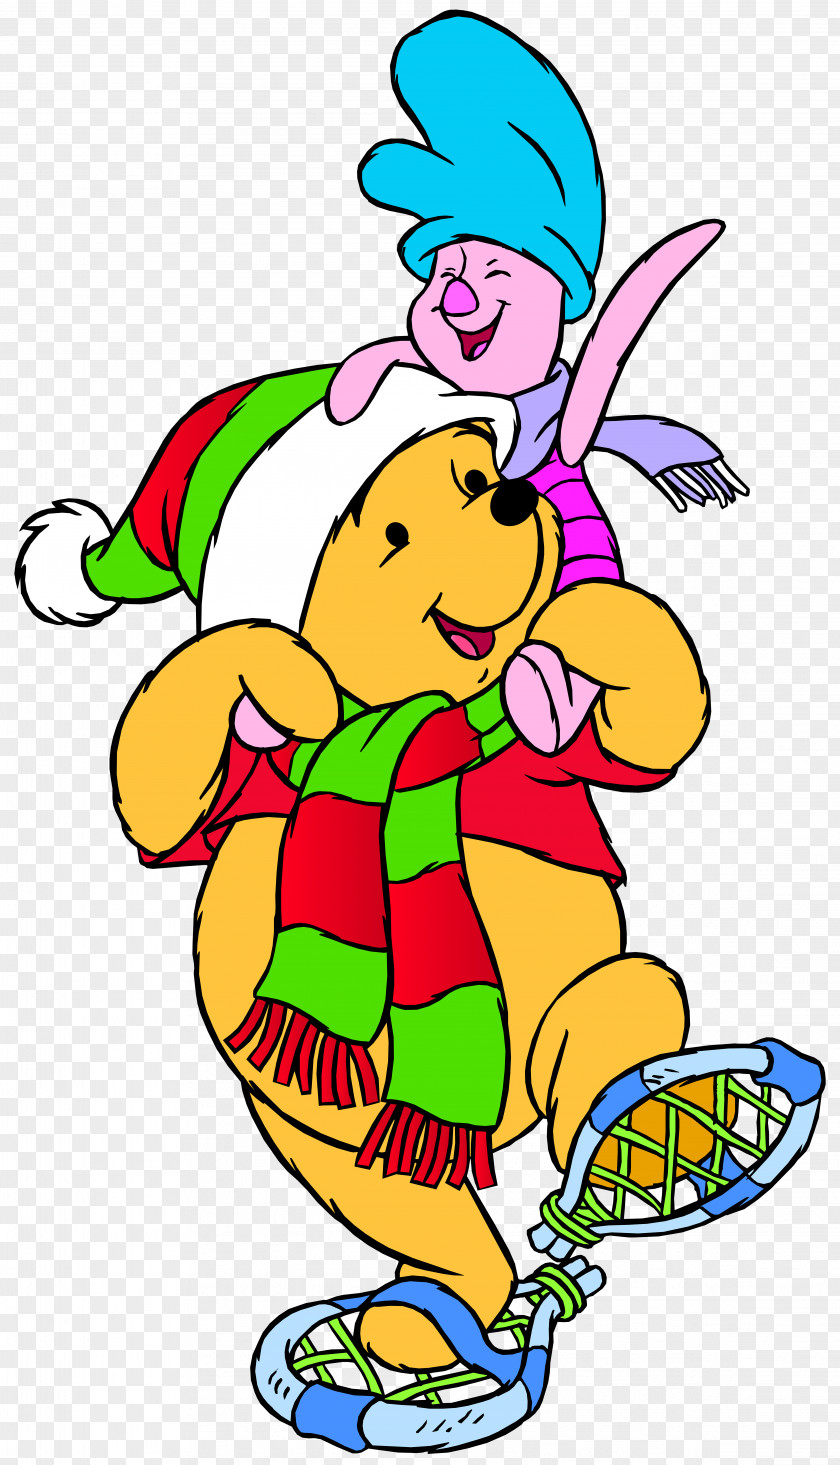 Winnie Pooh The Piglet Eeyore Tigger Hundred Acre Wood PNG